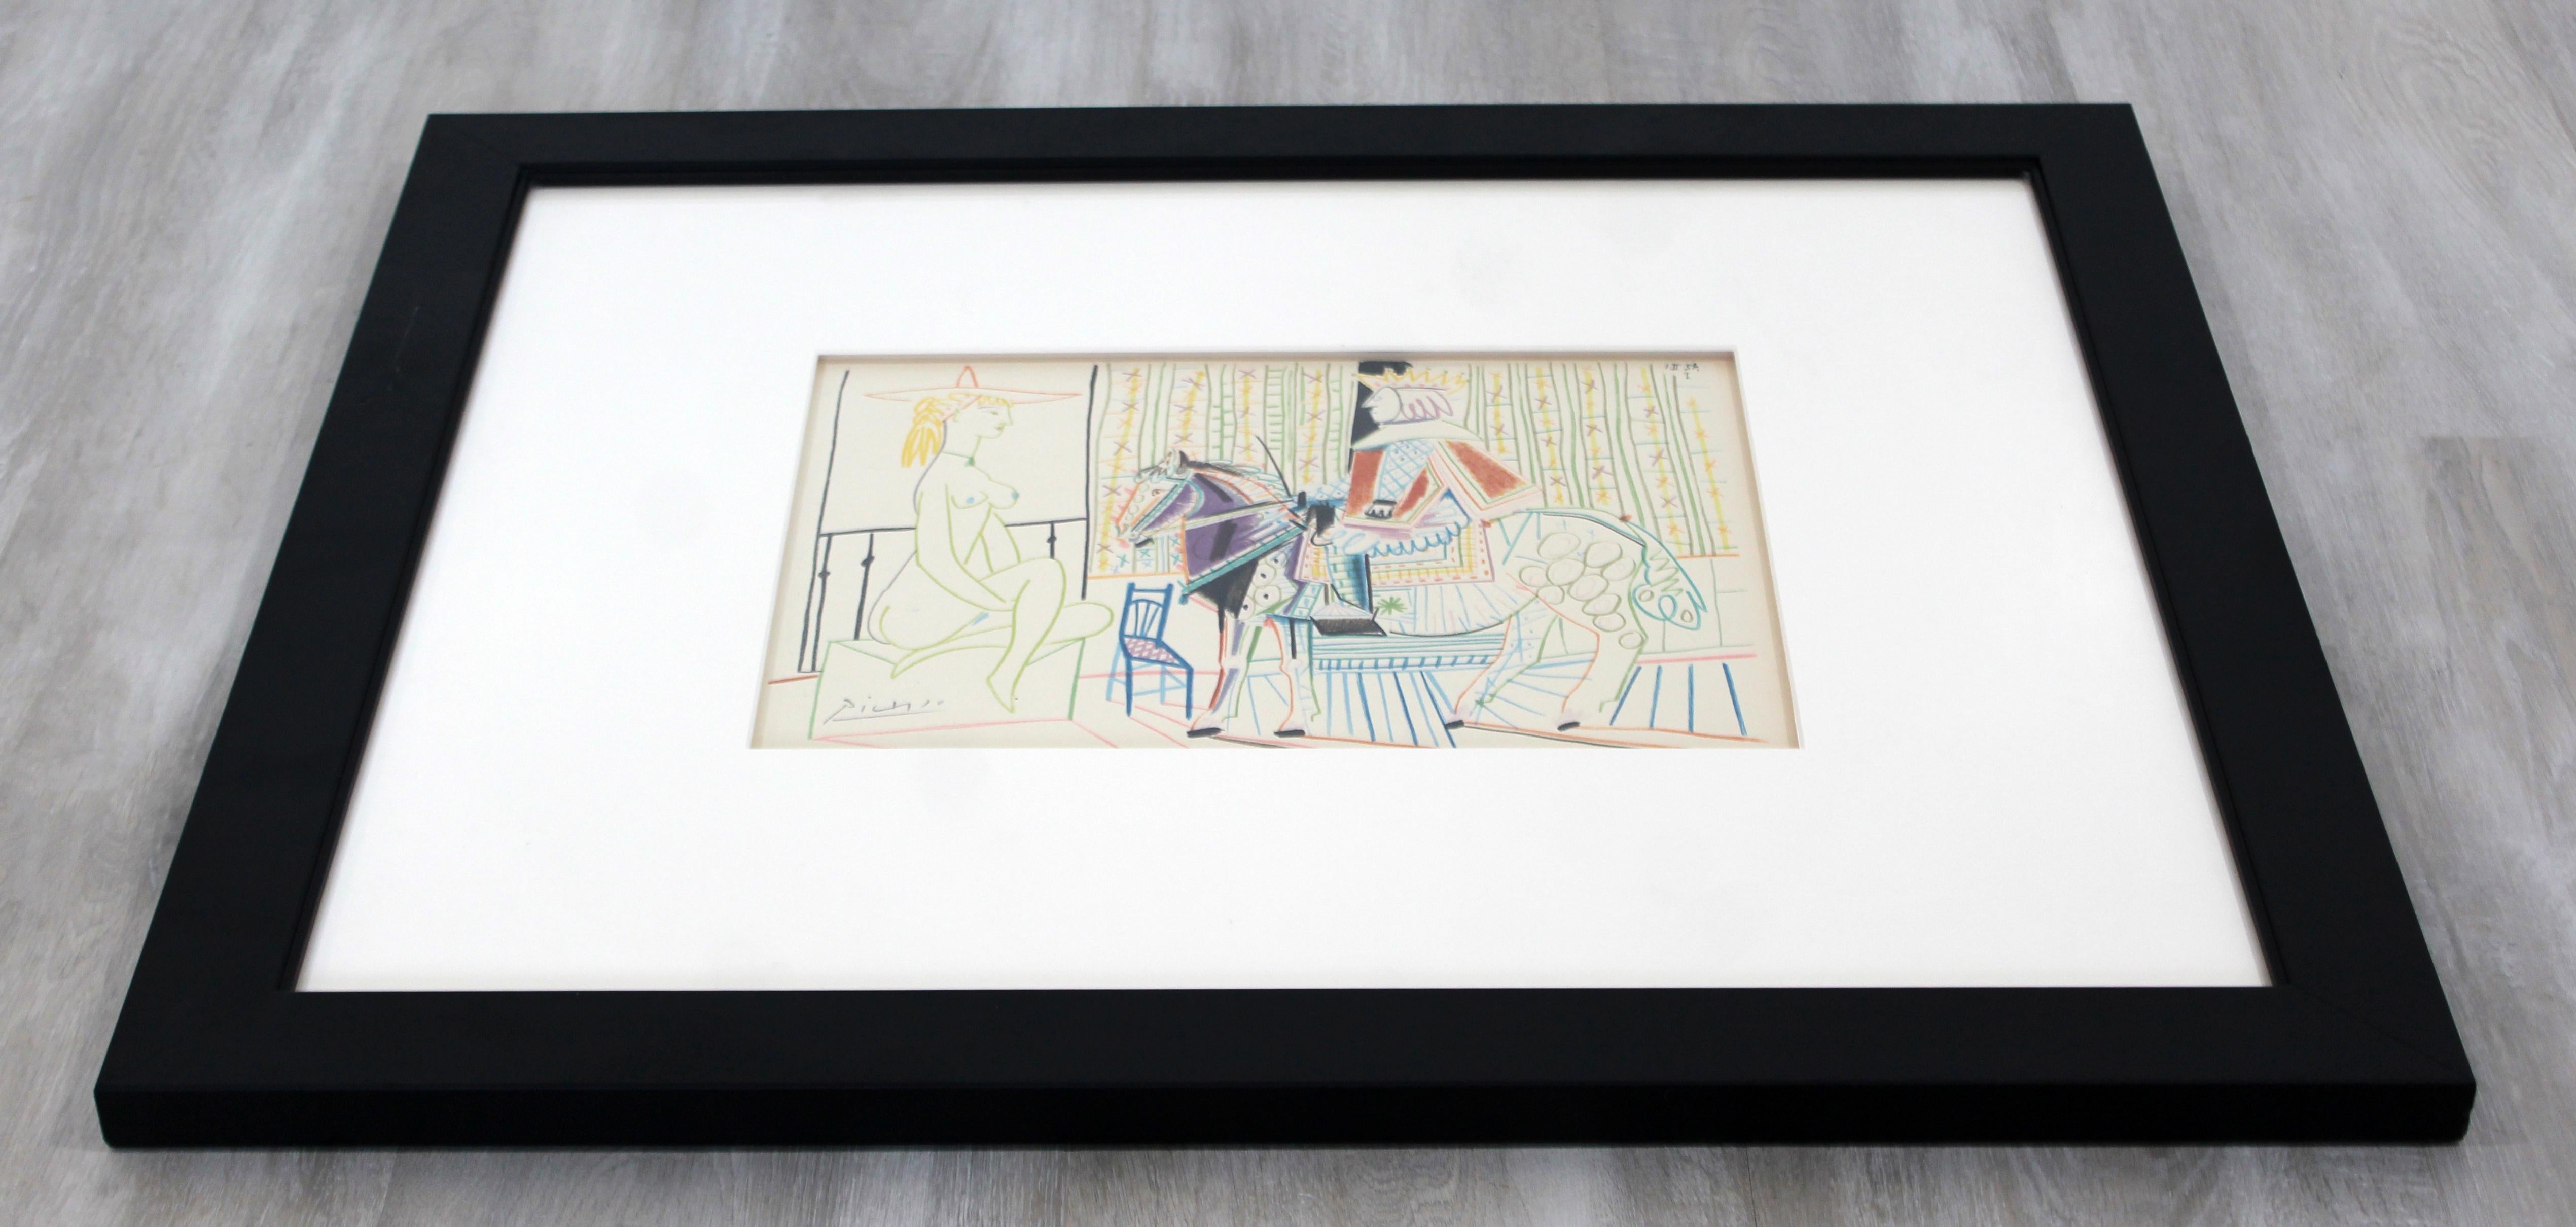 Mid-20th Century Mid-Century Modern Pablo Picasso King on Brown Horse Signed Framed Lithograph